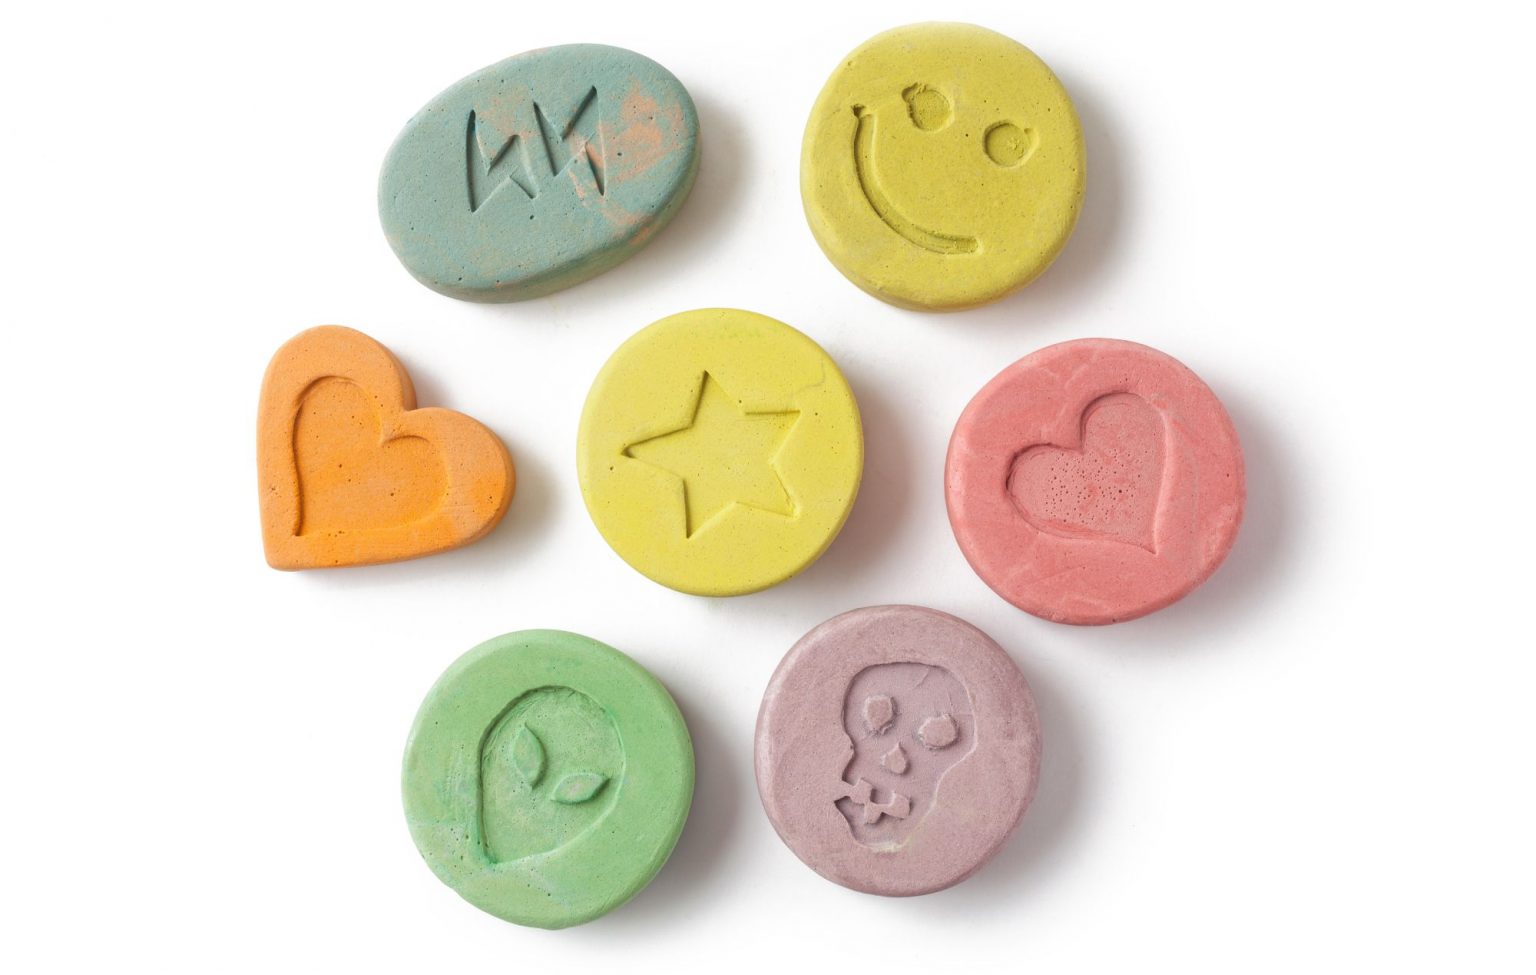 Naked Lady Ecstasy Pill